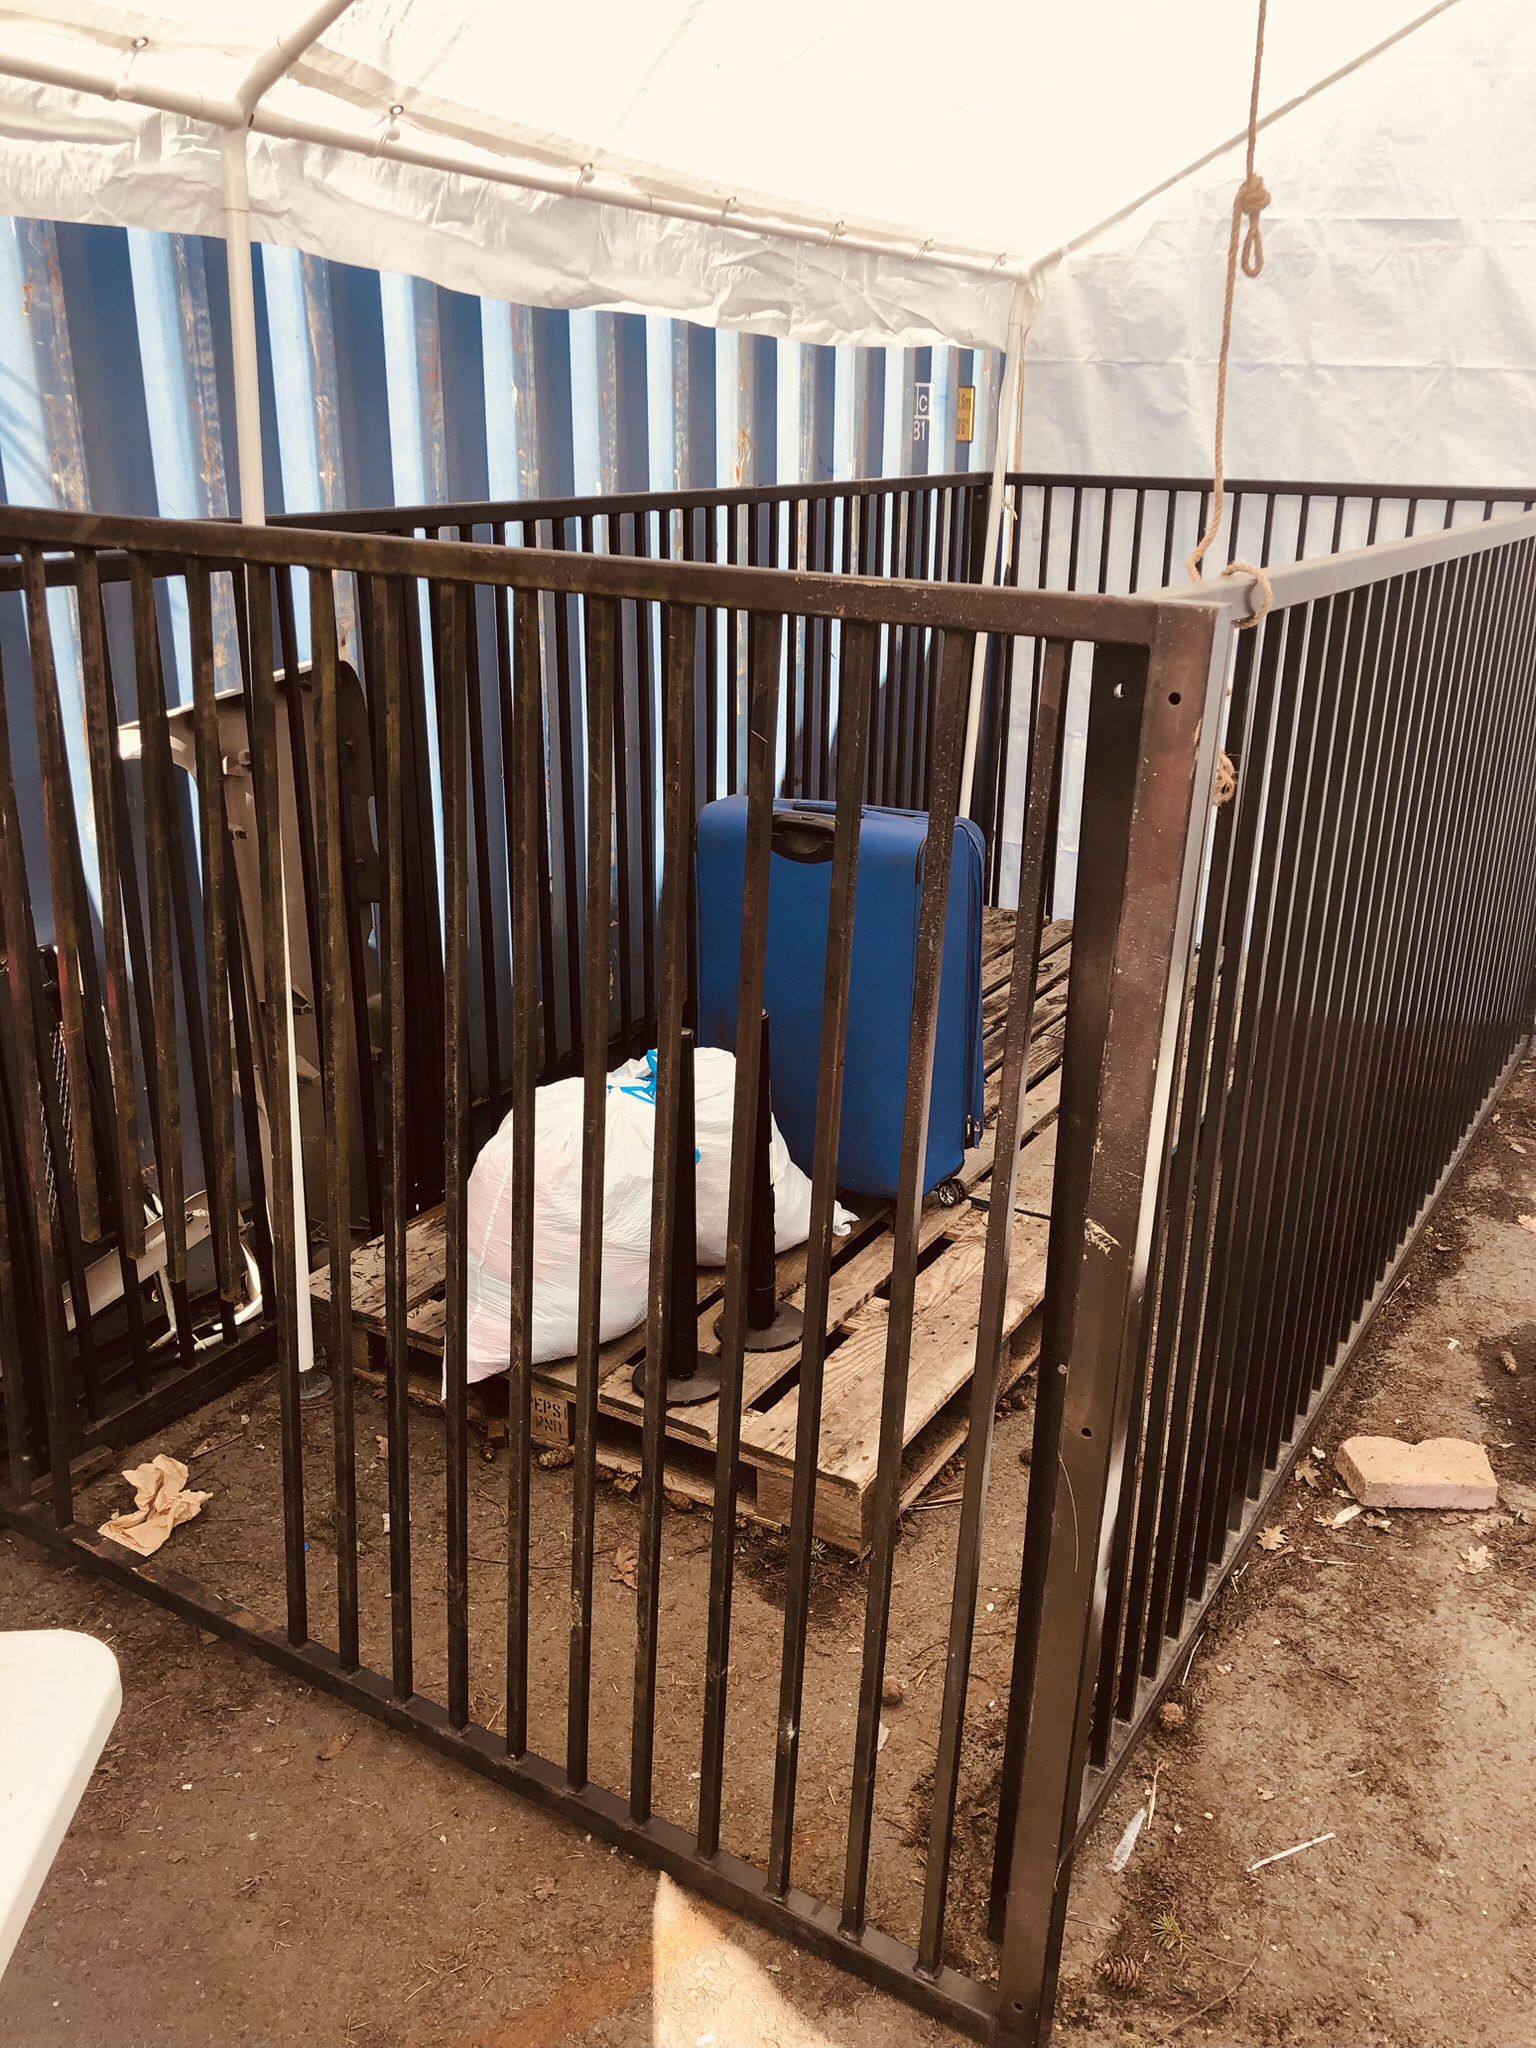 Dog Pen/cage $500 12’ long X 6’ wide X 5’ tall